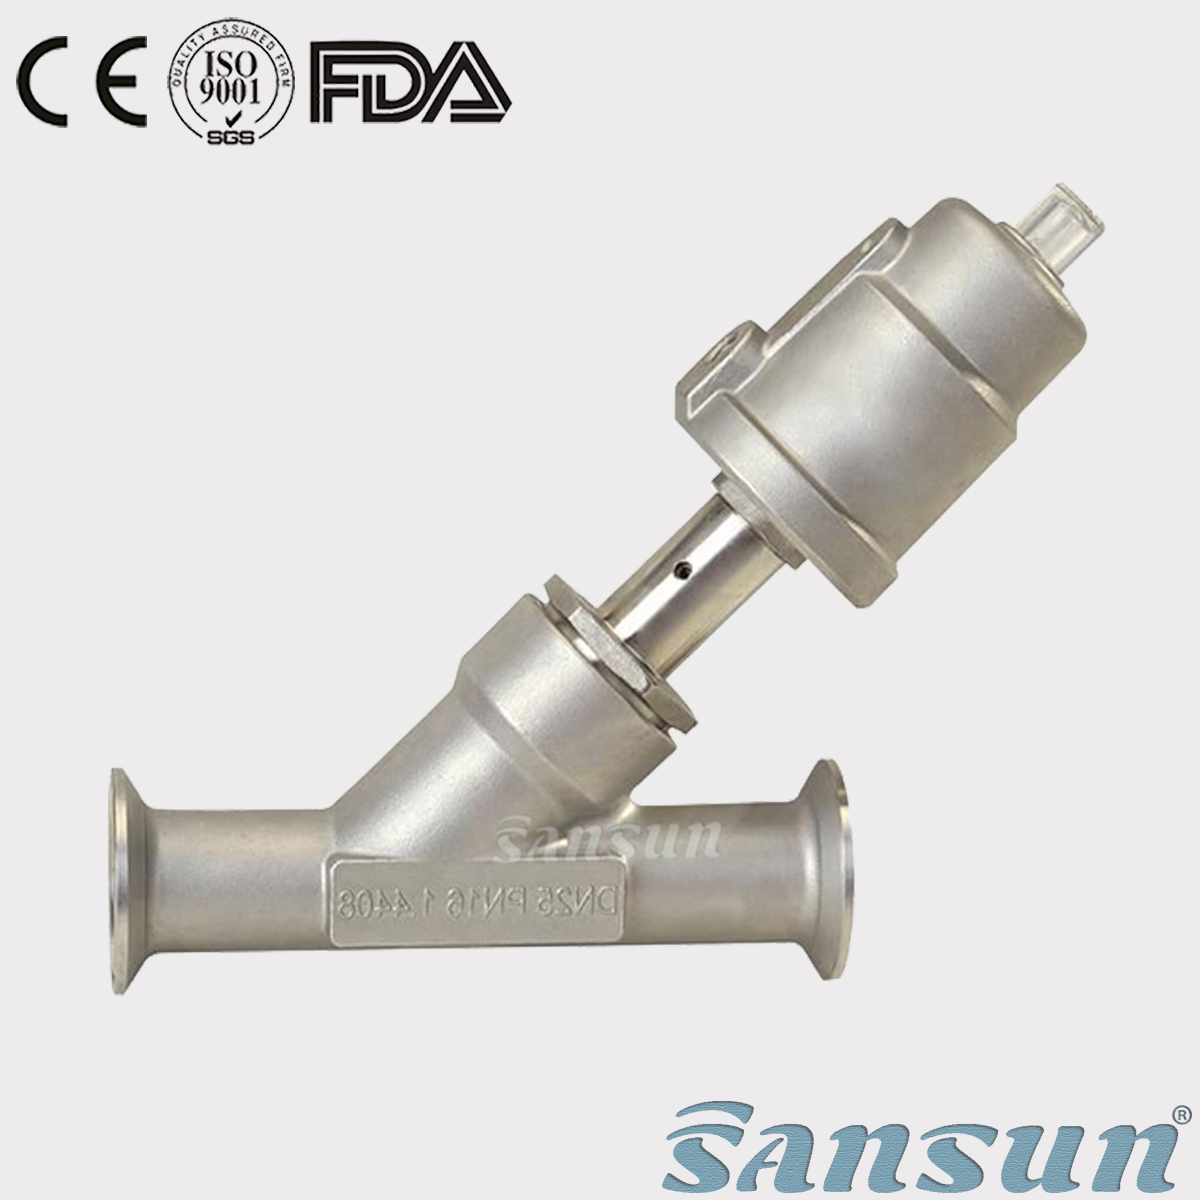 1'' Inch PNEUMATIC SS SANITARY ANGLE SEAT VALVE With TRI CLAMP FITTING DN25 